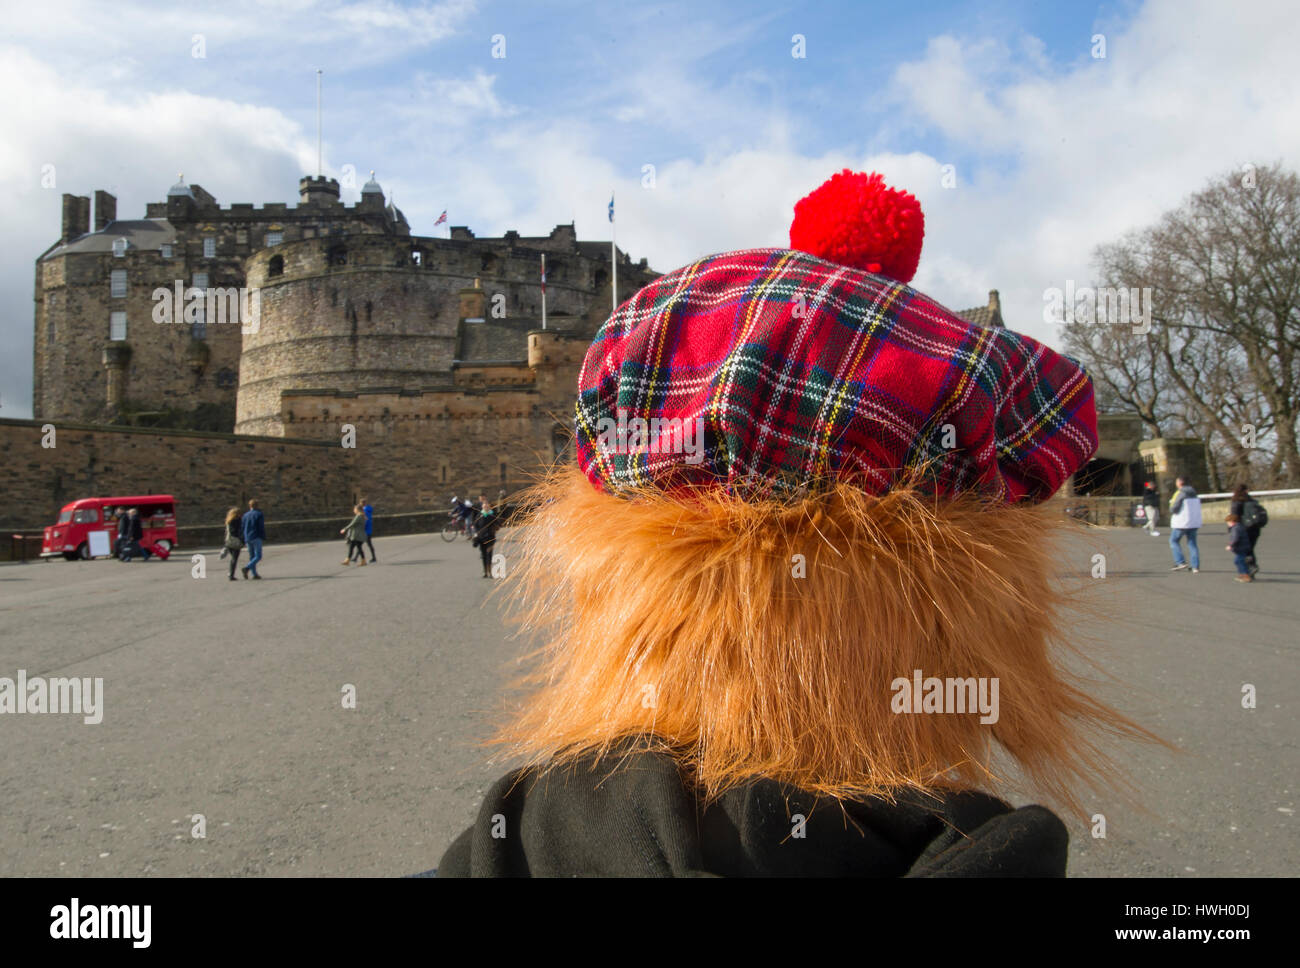 A unidentified tourist wearing a 'See you Jimmy hat' during a visit to Edinburgh castle. Stock Photo